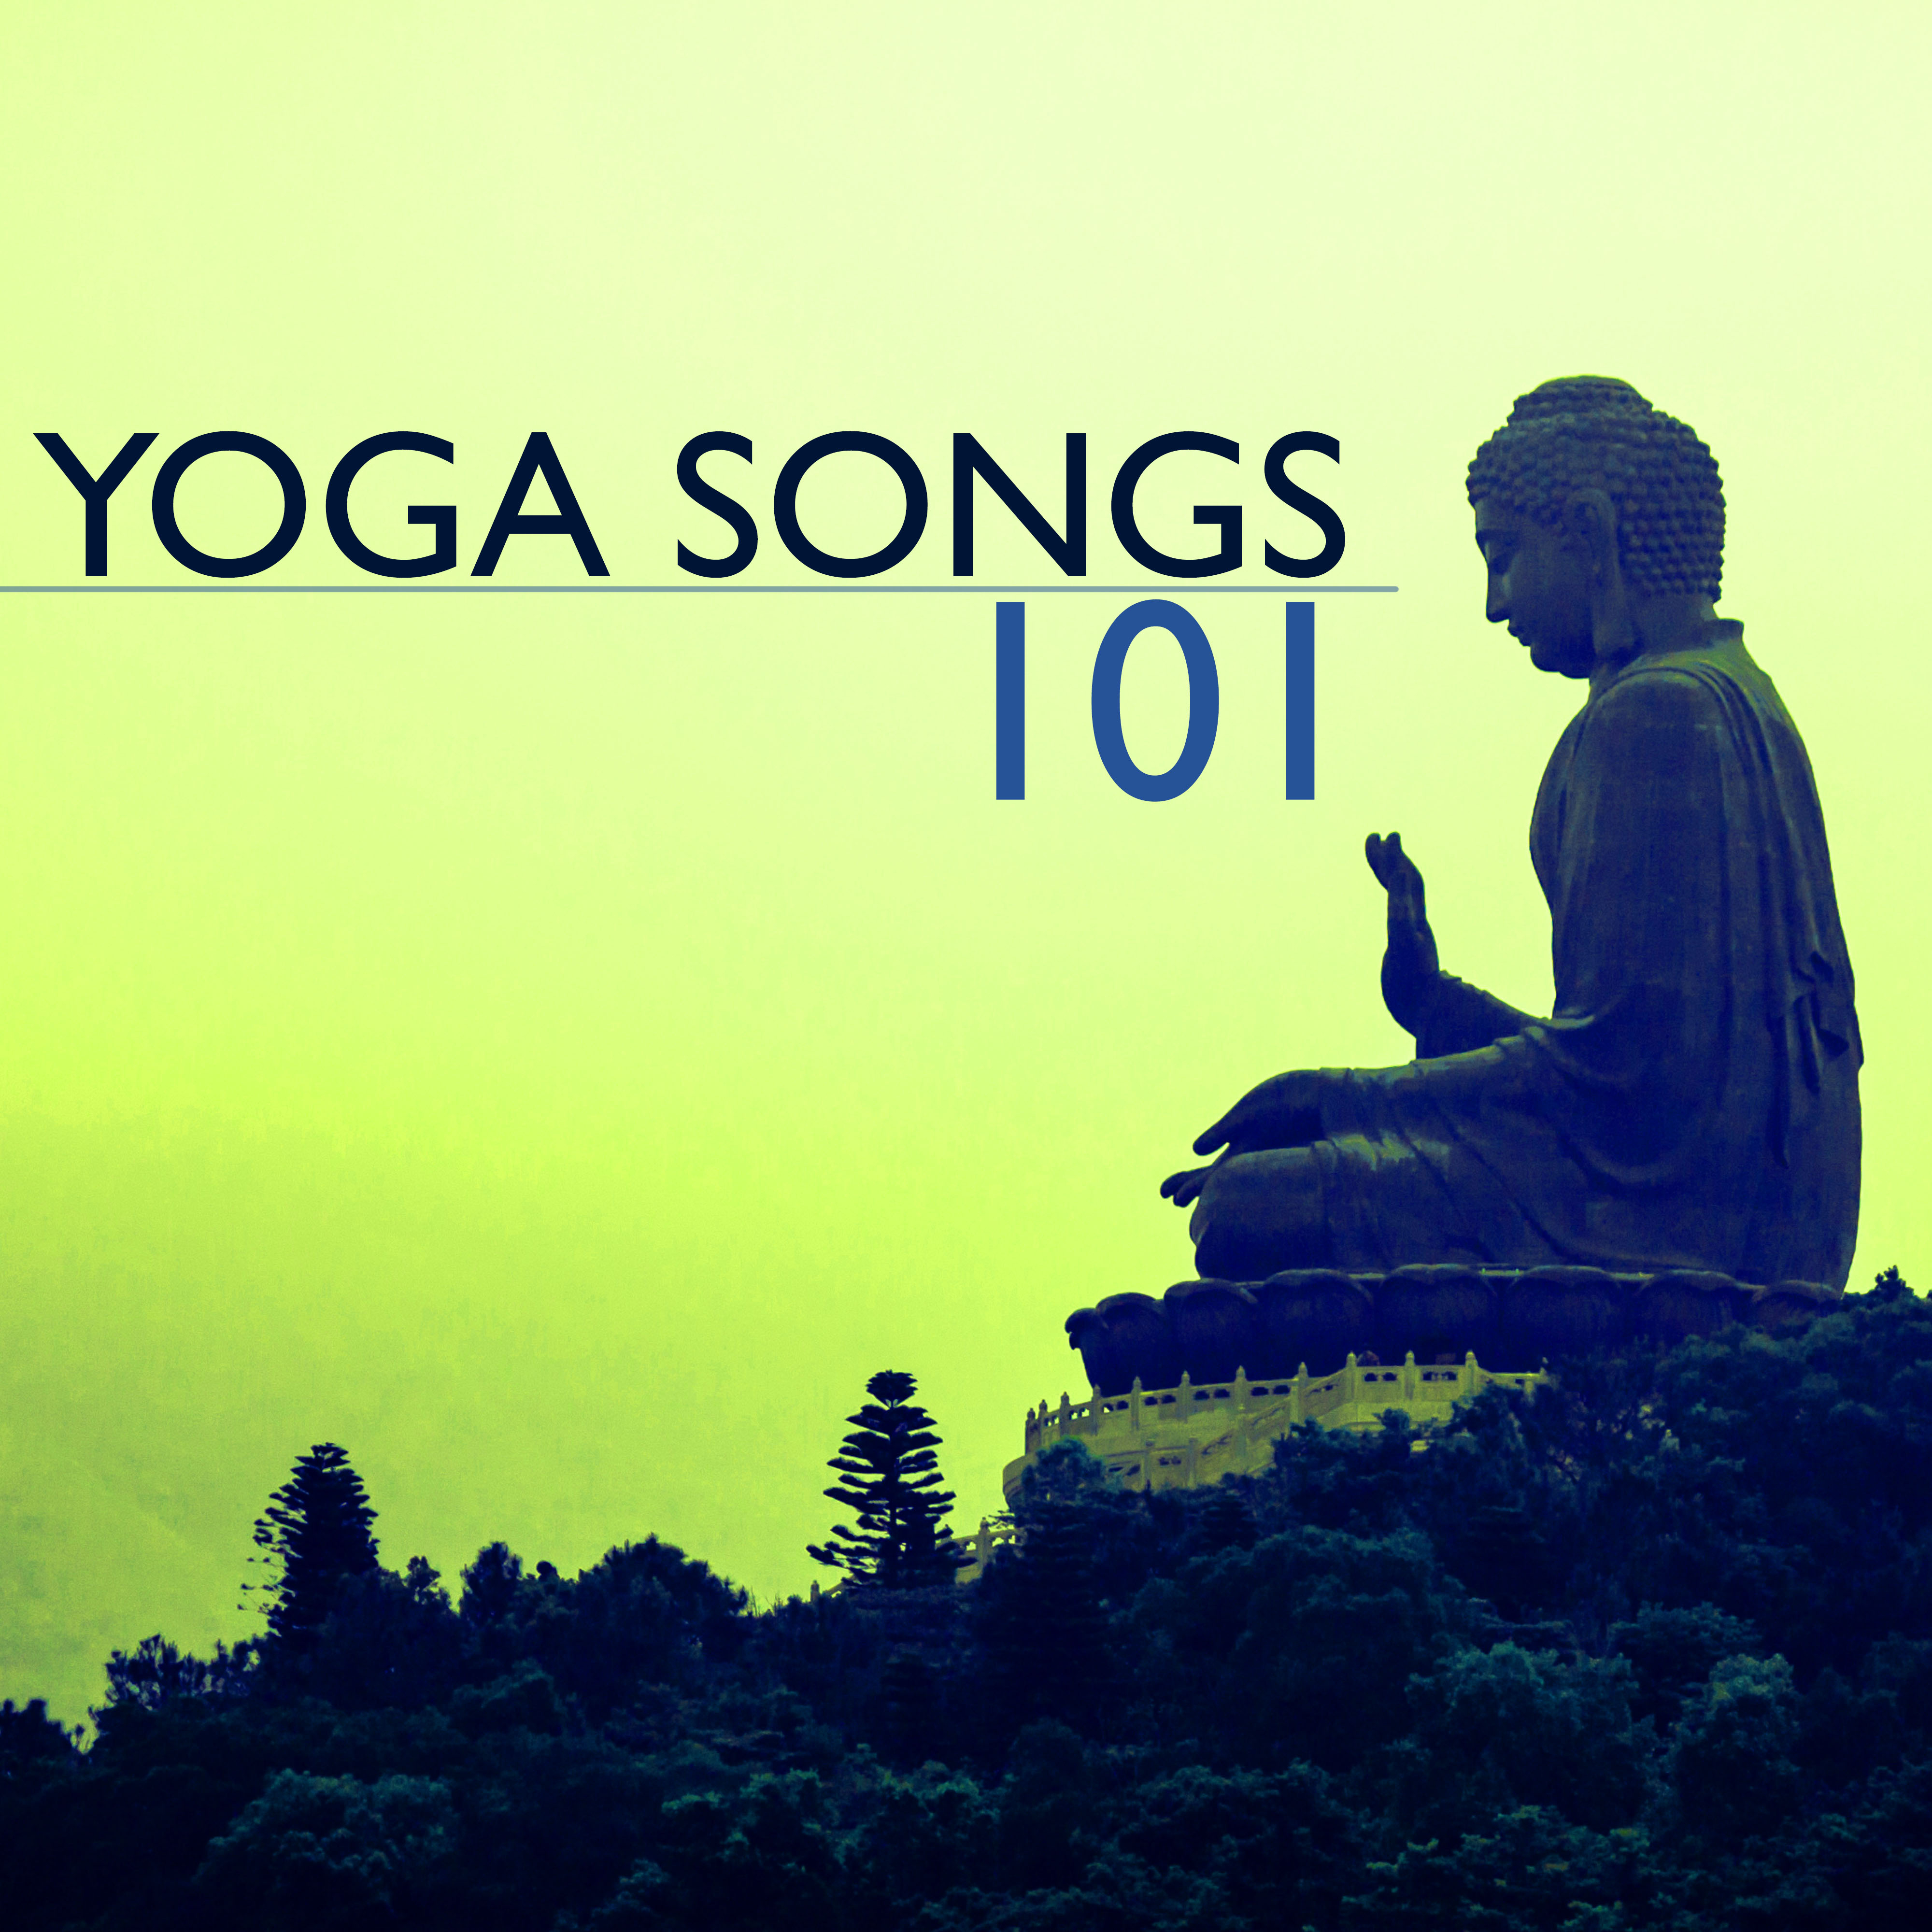 Yoga Songs 101 - Music for Yoga Classes, Morning Routine and Evening Mindfulness Meditations